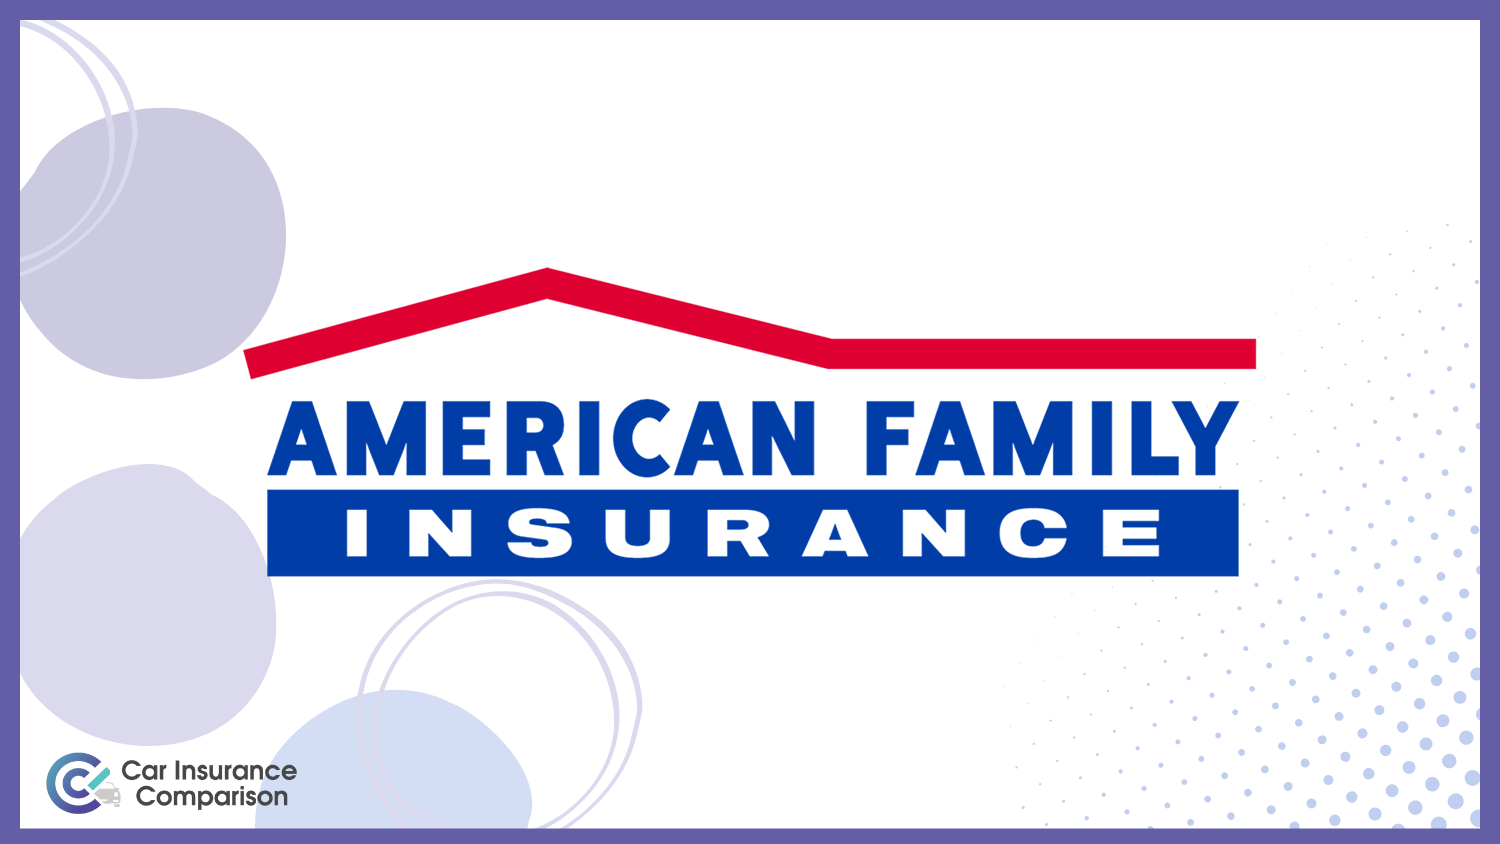 American Family: Delivery Driver Car Insurance: Compare Rates, Discounts, & Requirements